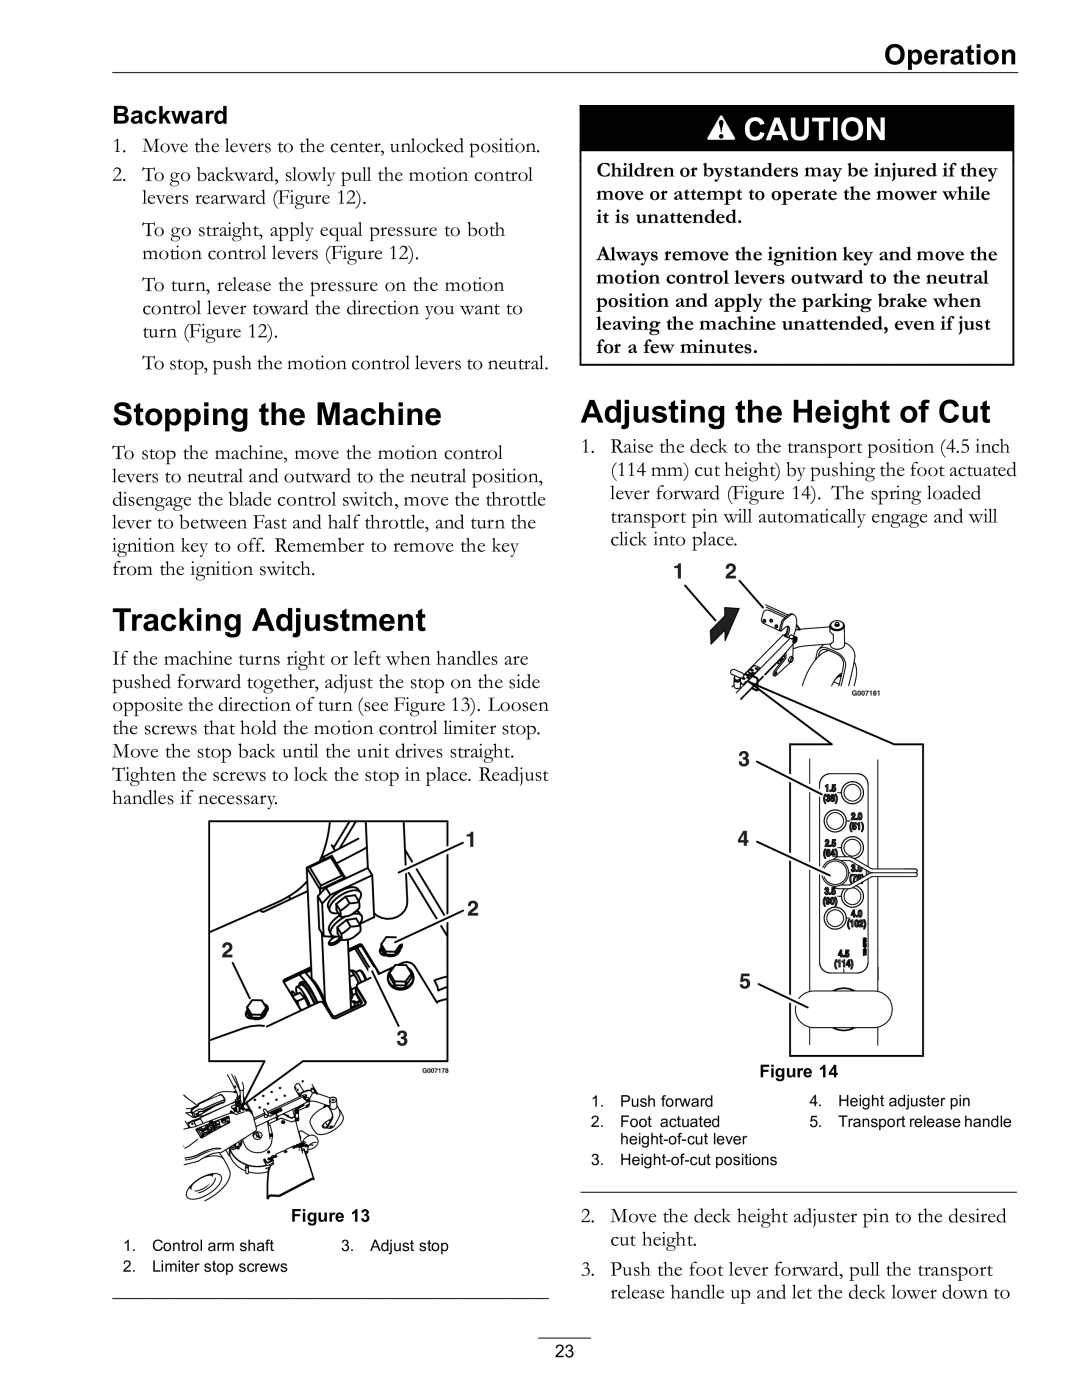 Exmark Lawn Mower manual Stopping the Machine, Adjusting the Height of Cut, Tracking Adjustment, Backward 